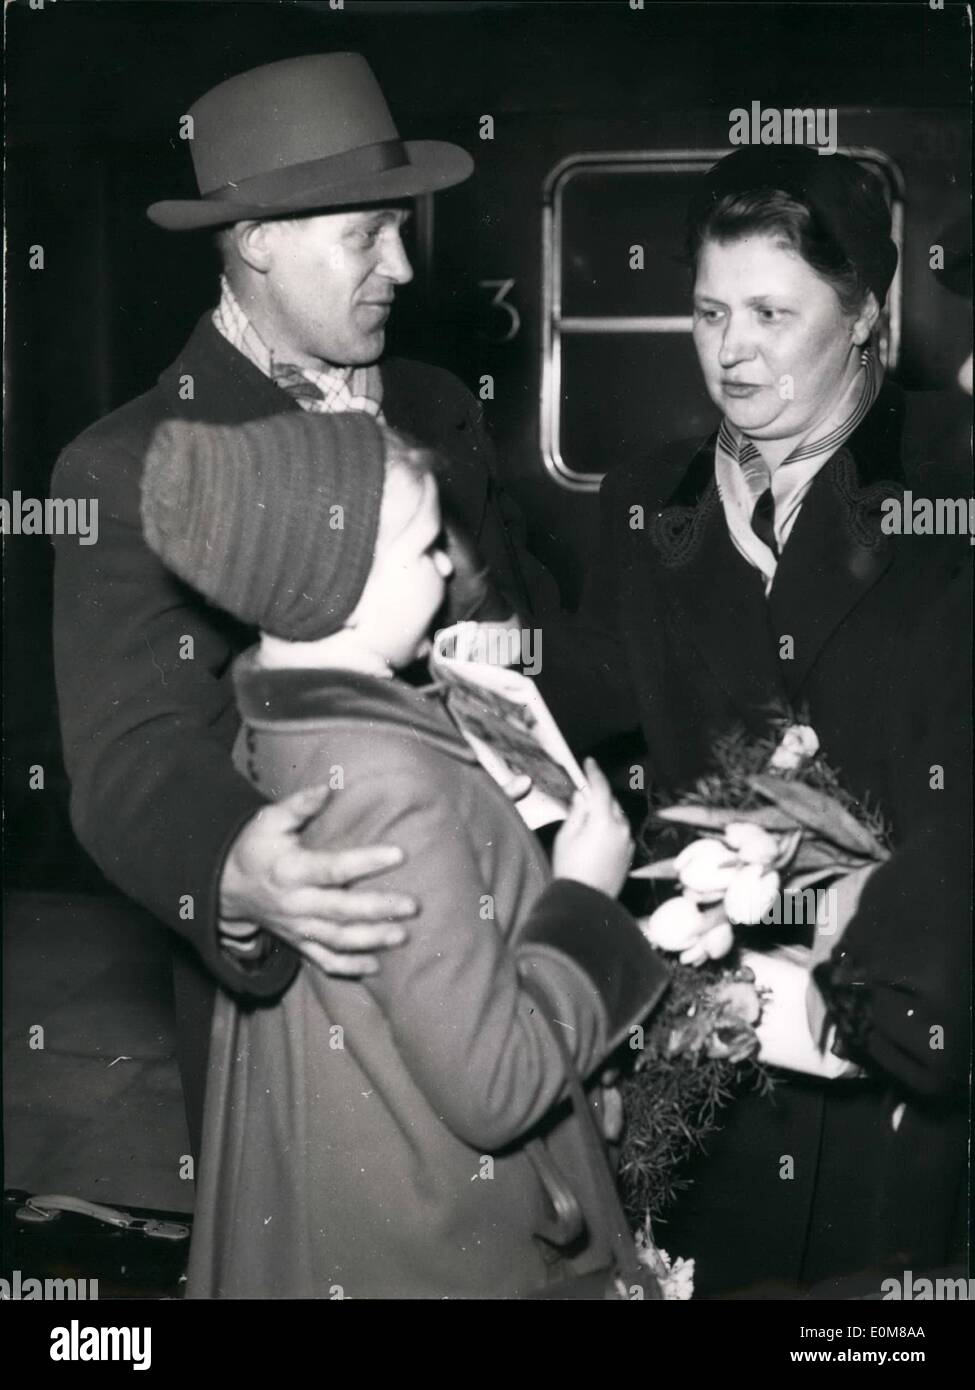 Dec. 12, 1953 - The apprentice of the former general-field-marshal Paulus refused a job in the Russian zone and went back to his home. After 10 years Russian prison-ship the former apprentice of general Paulus, the 40 years old saddler Erwin Schulte, returned home to Guterslohe. He refused to accept a job in the Russian zone which had been offered to him and returned to his family. Schulte had been long time the personal apprentice of Paulus when he lived in a villa in Moscow Stock Photo